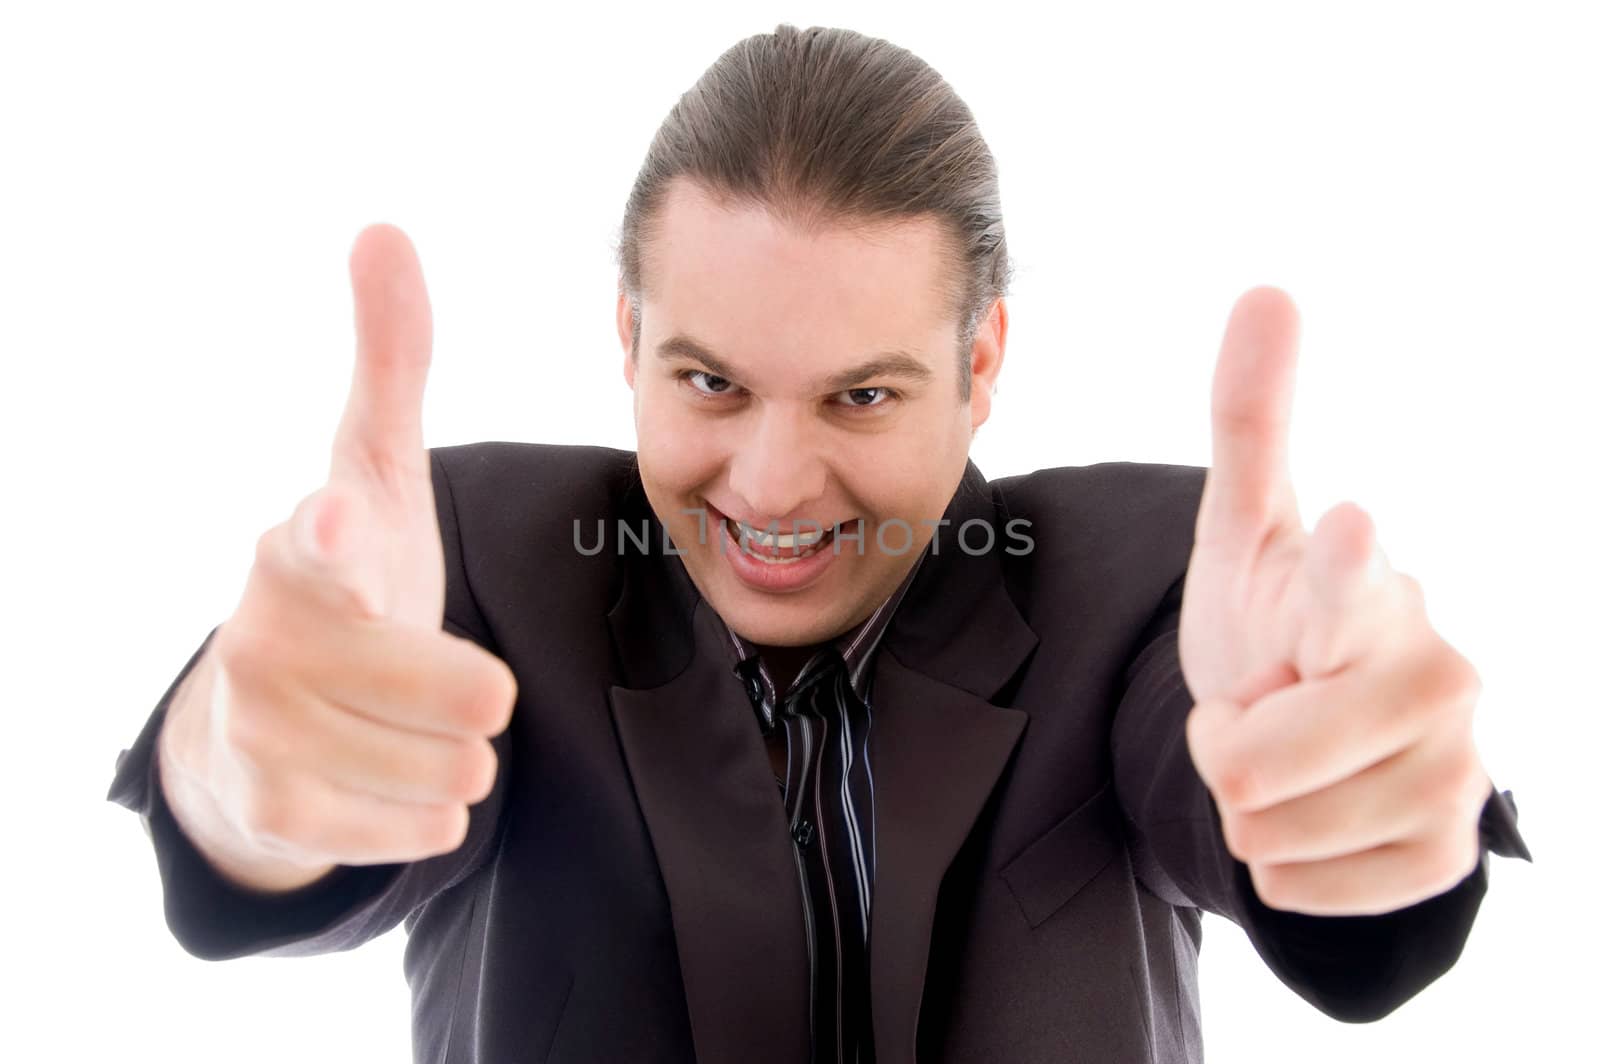 young businessman showing thumbs up on an isolated white background